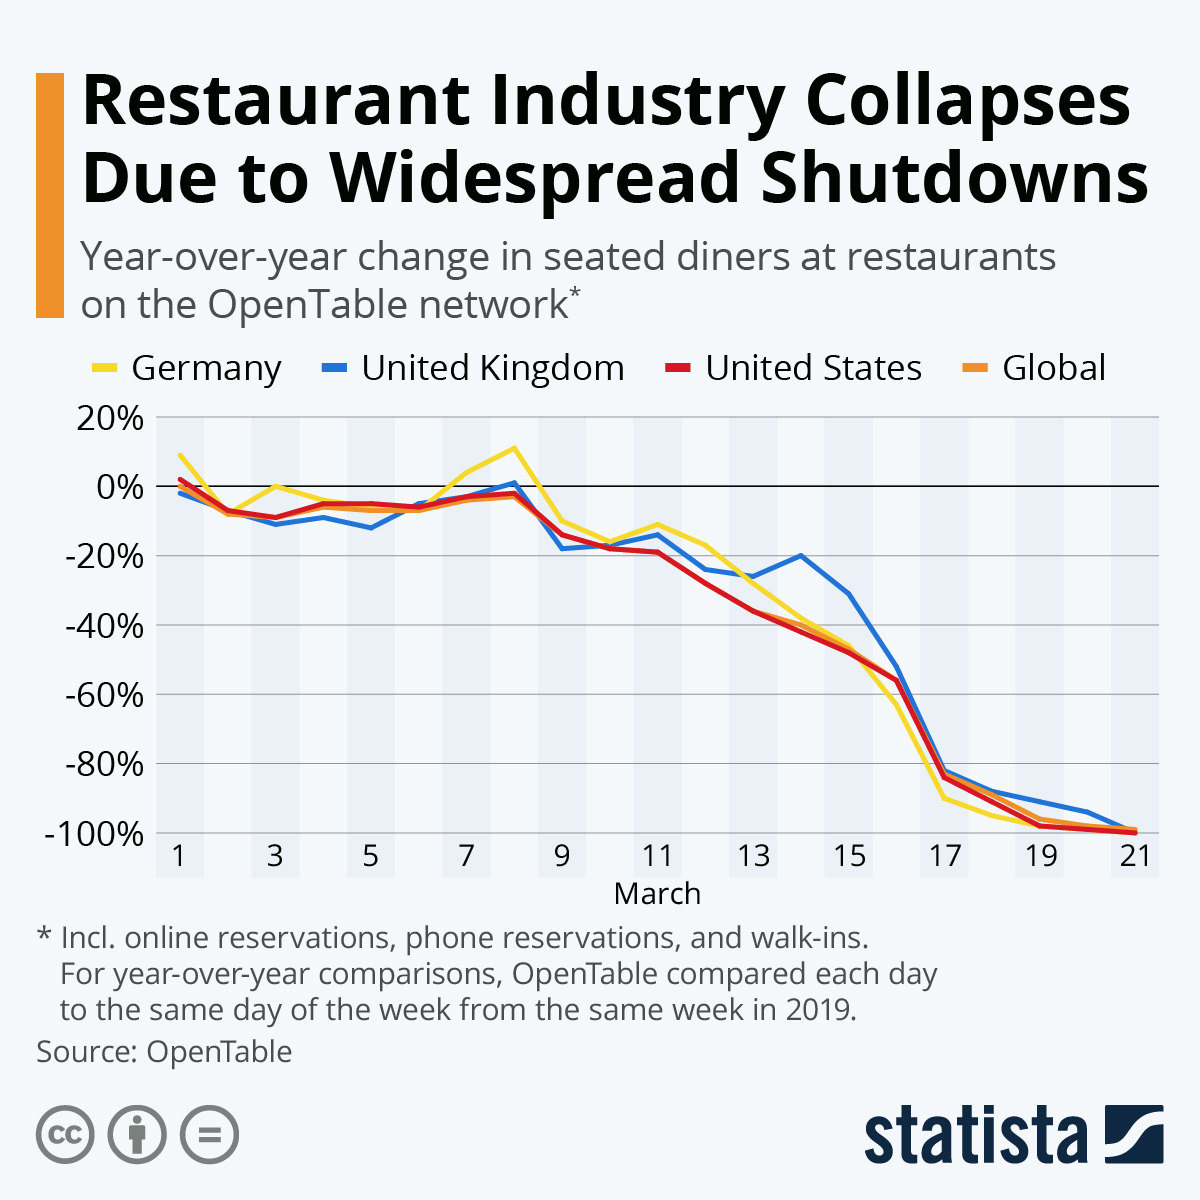 Restaurant industry collapses due to widespread shutdowns